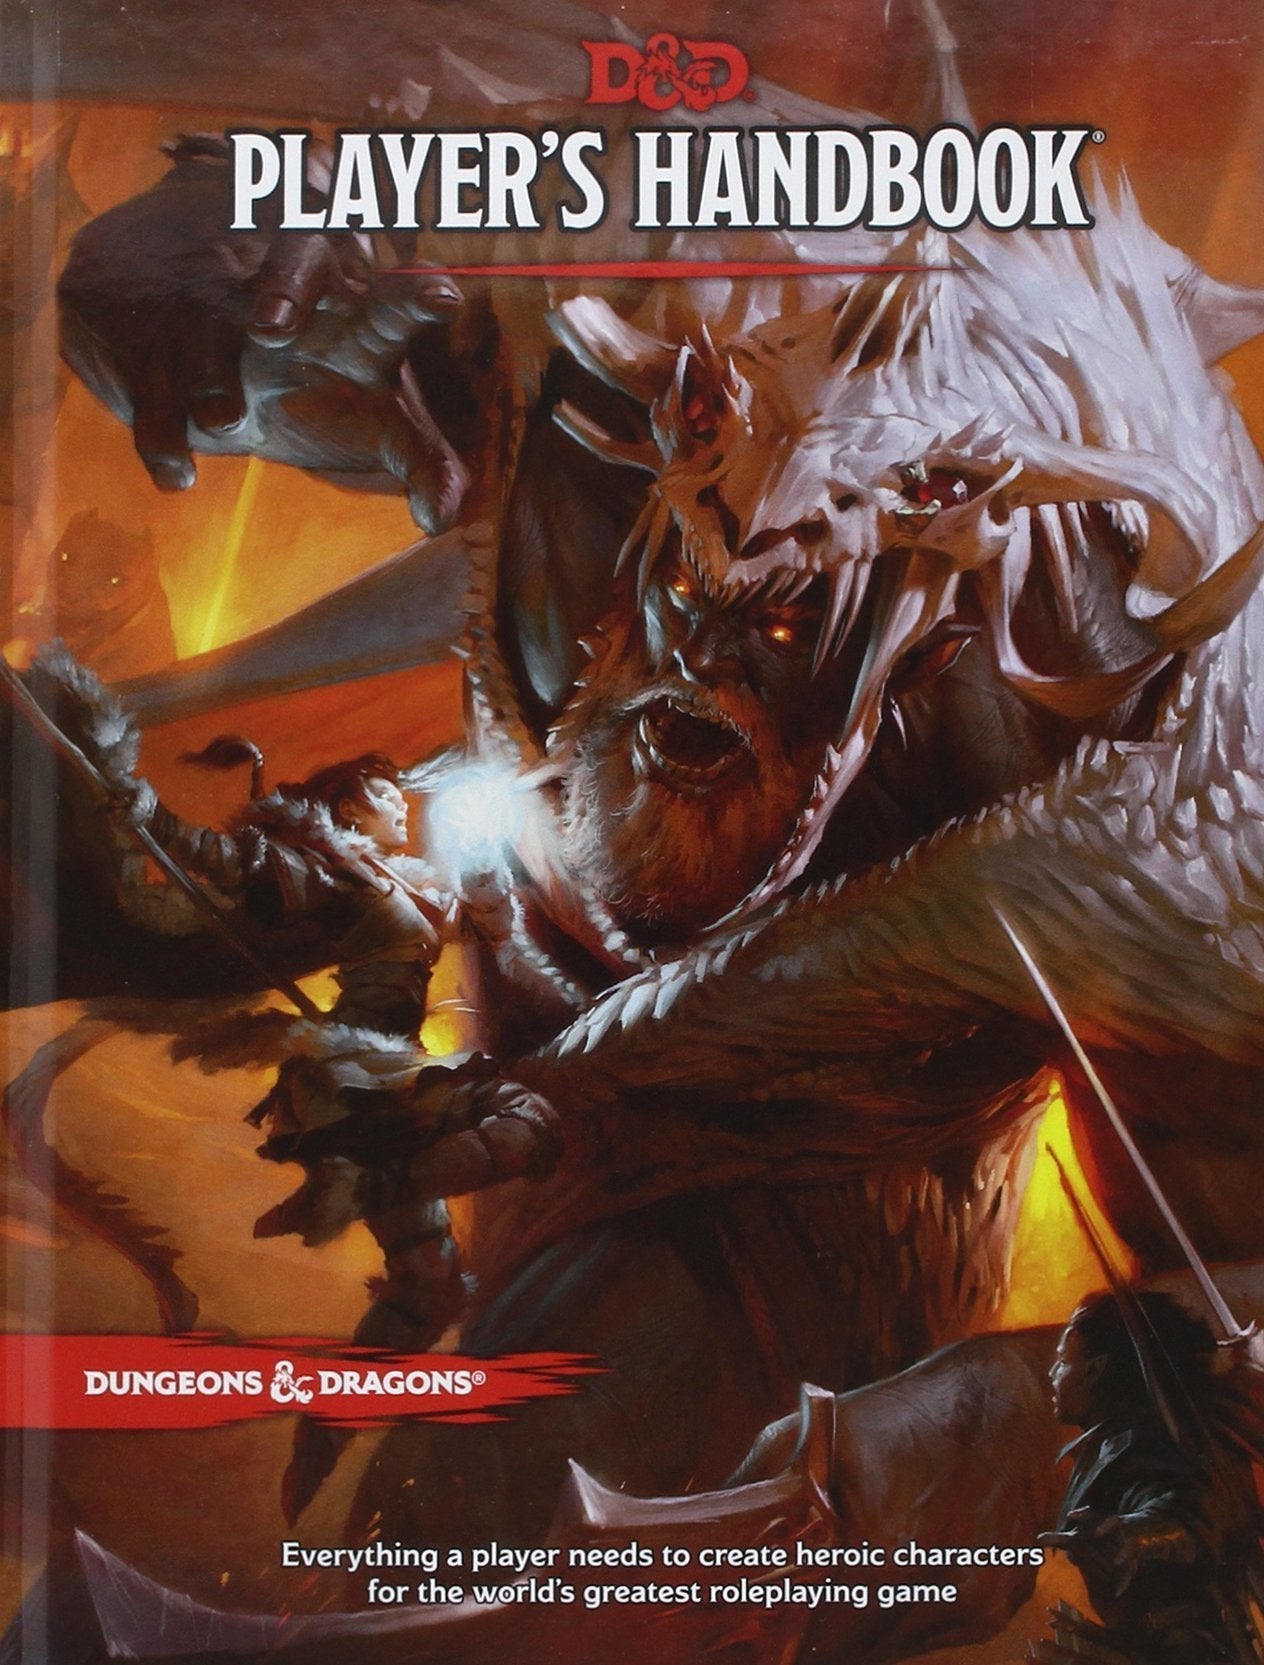 Dungeons & Dragons RPG: 5E Player's Handbook from Wizards of the Coast at The Compleat Strategist